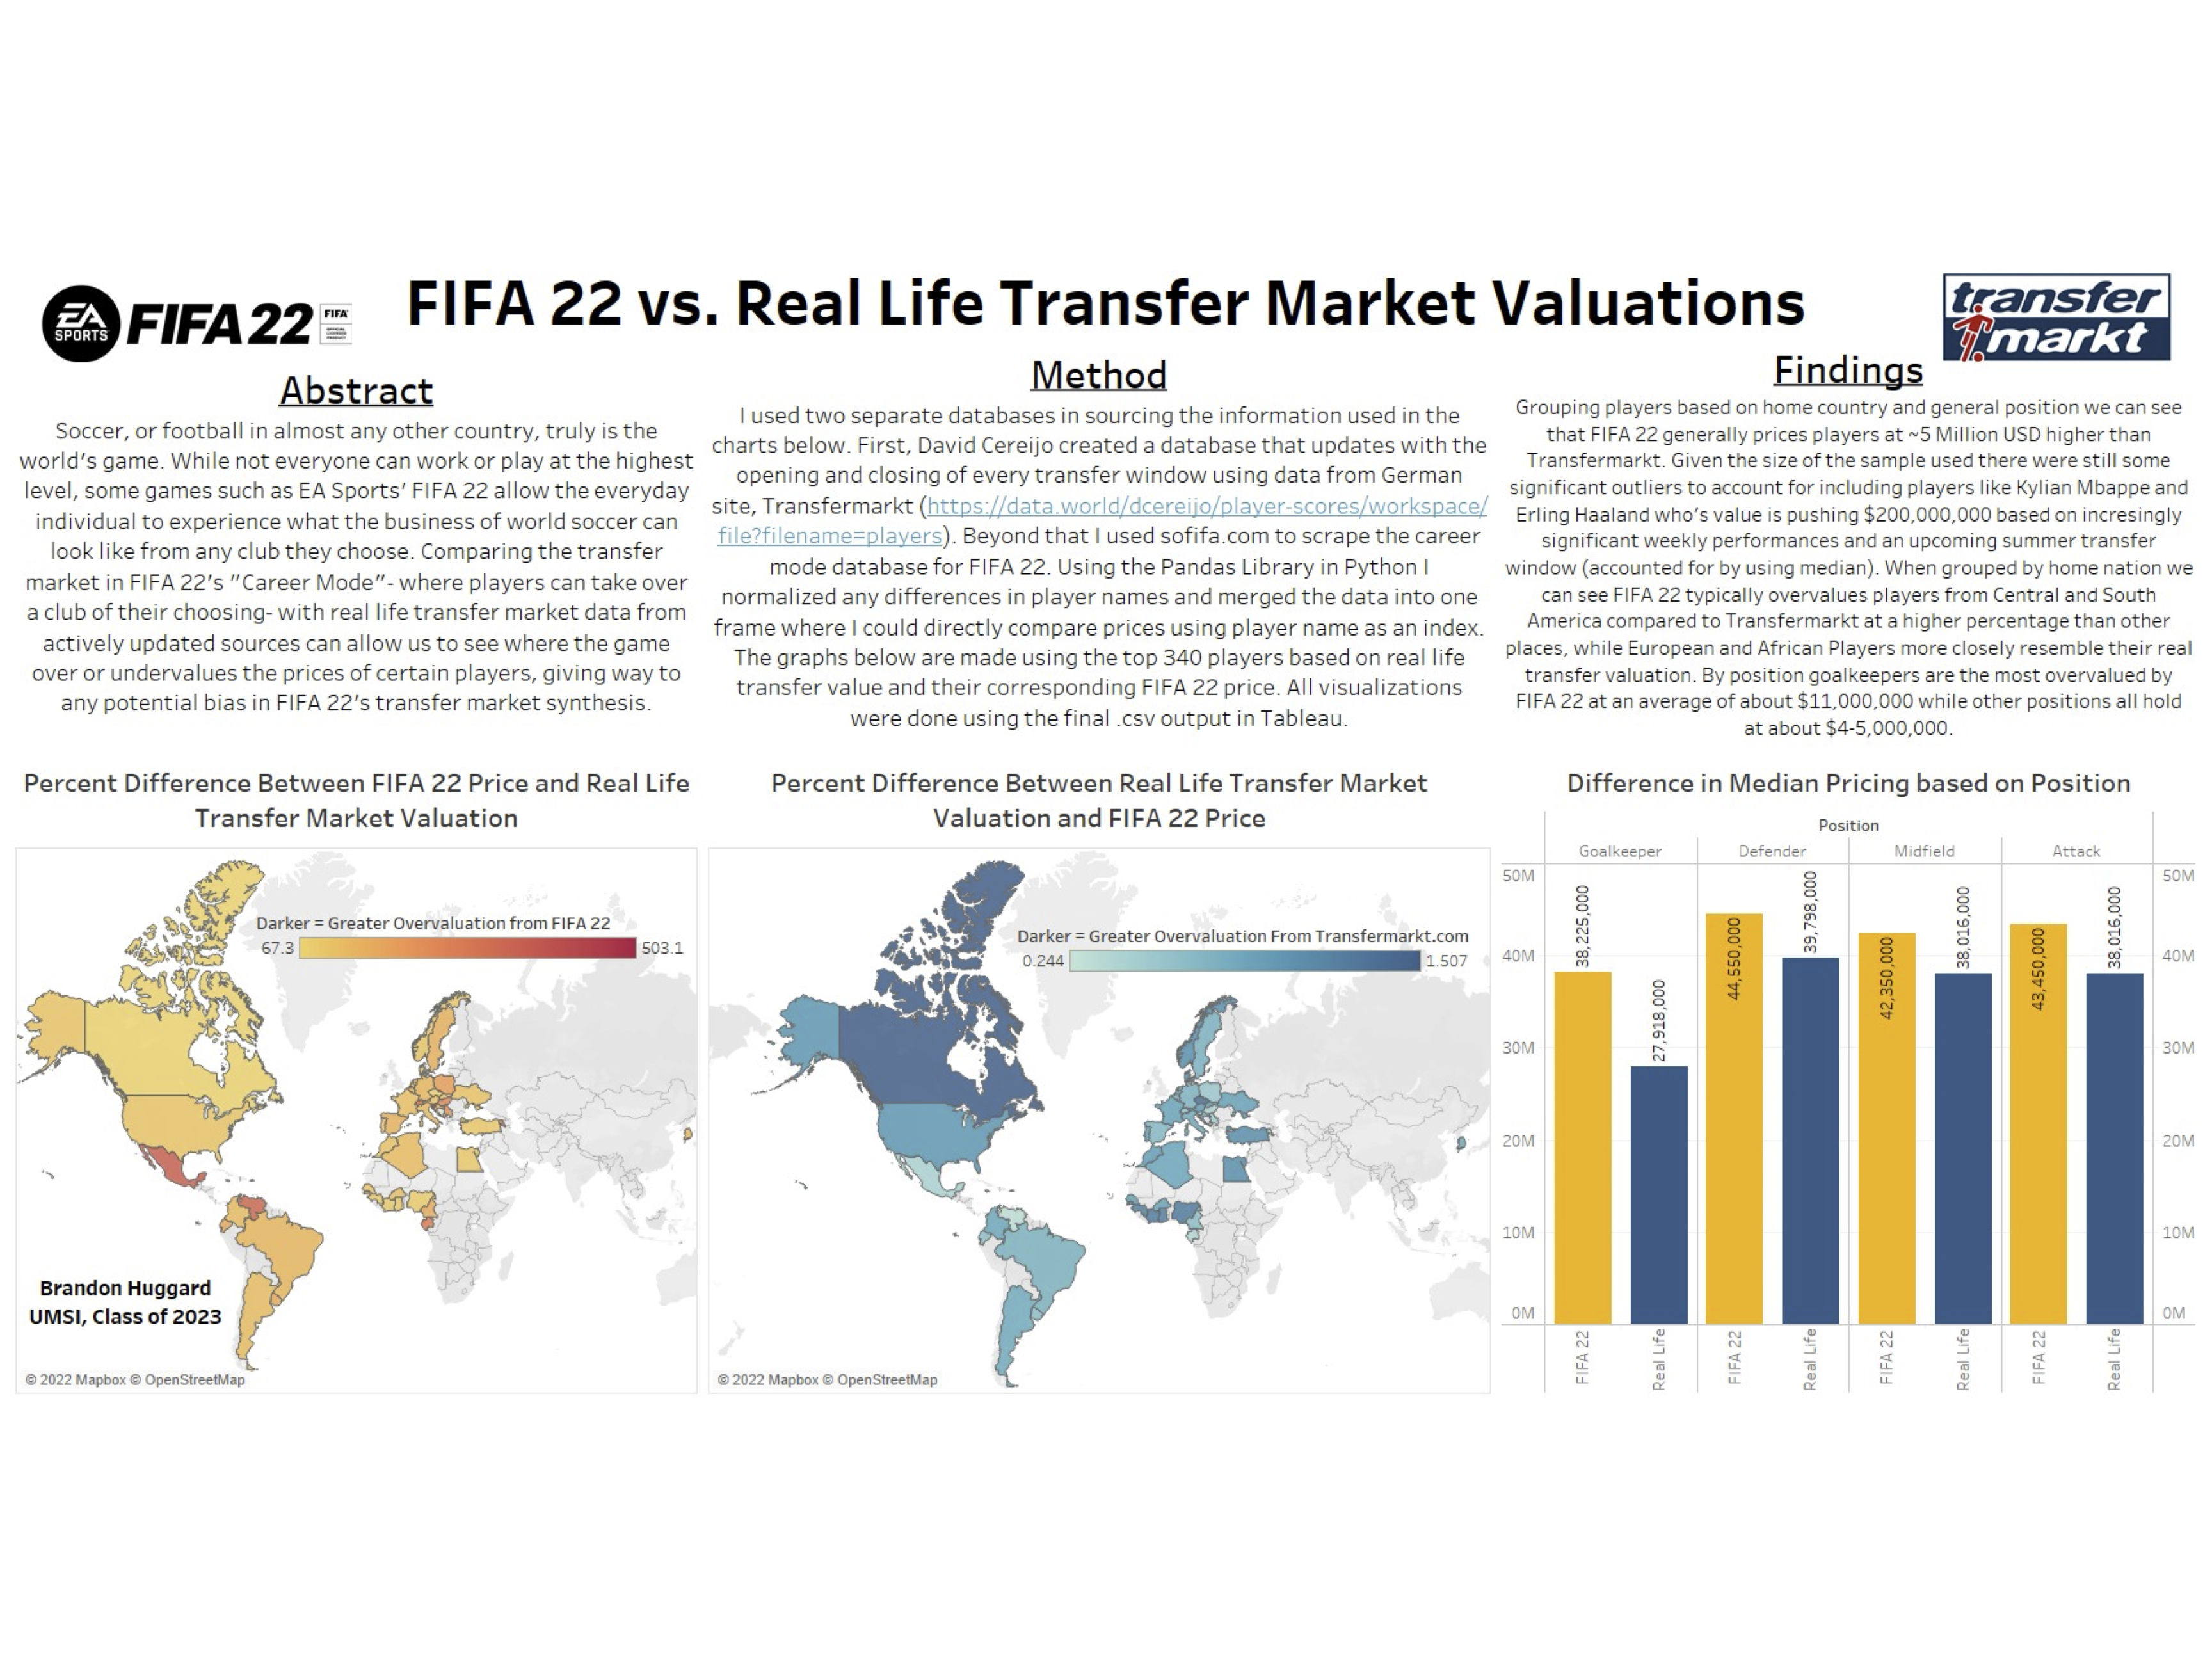 Project poster, "FIFA '22 vs. Real Life Transfer Market Valuations."